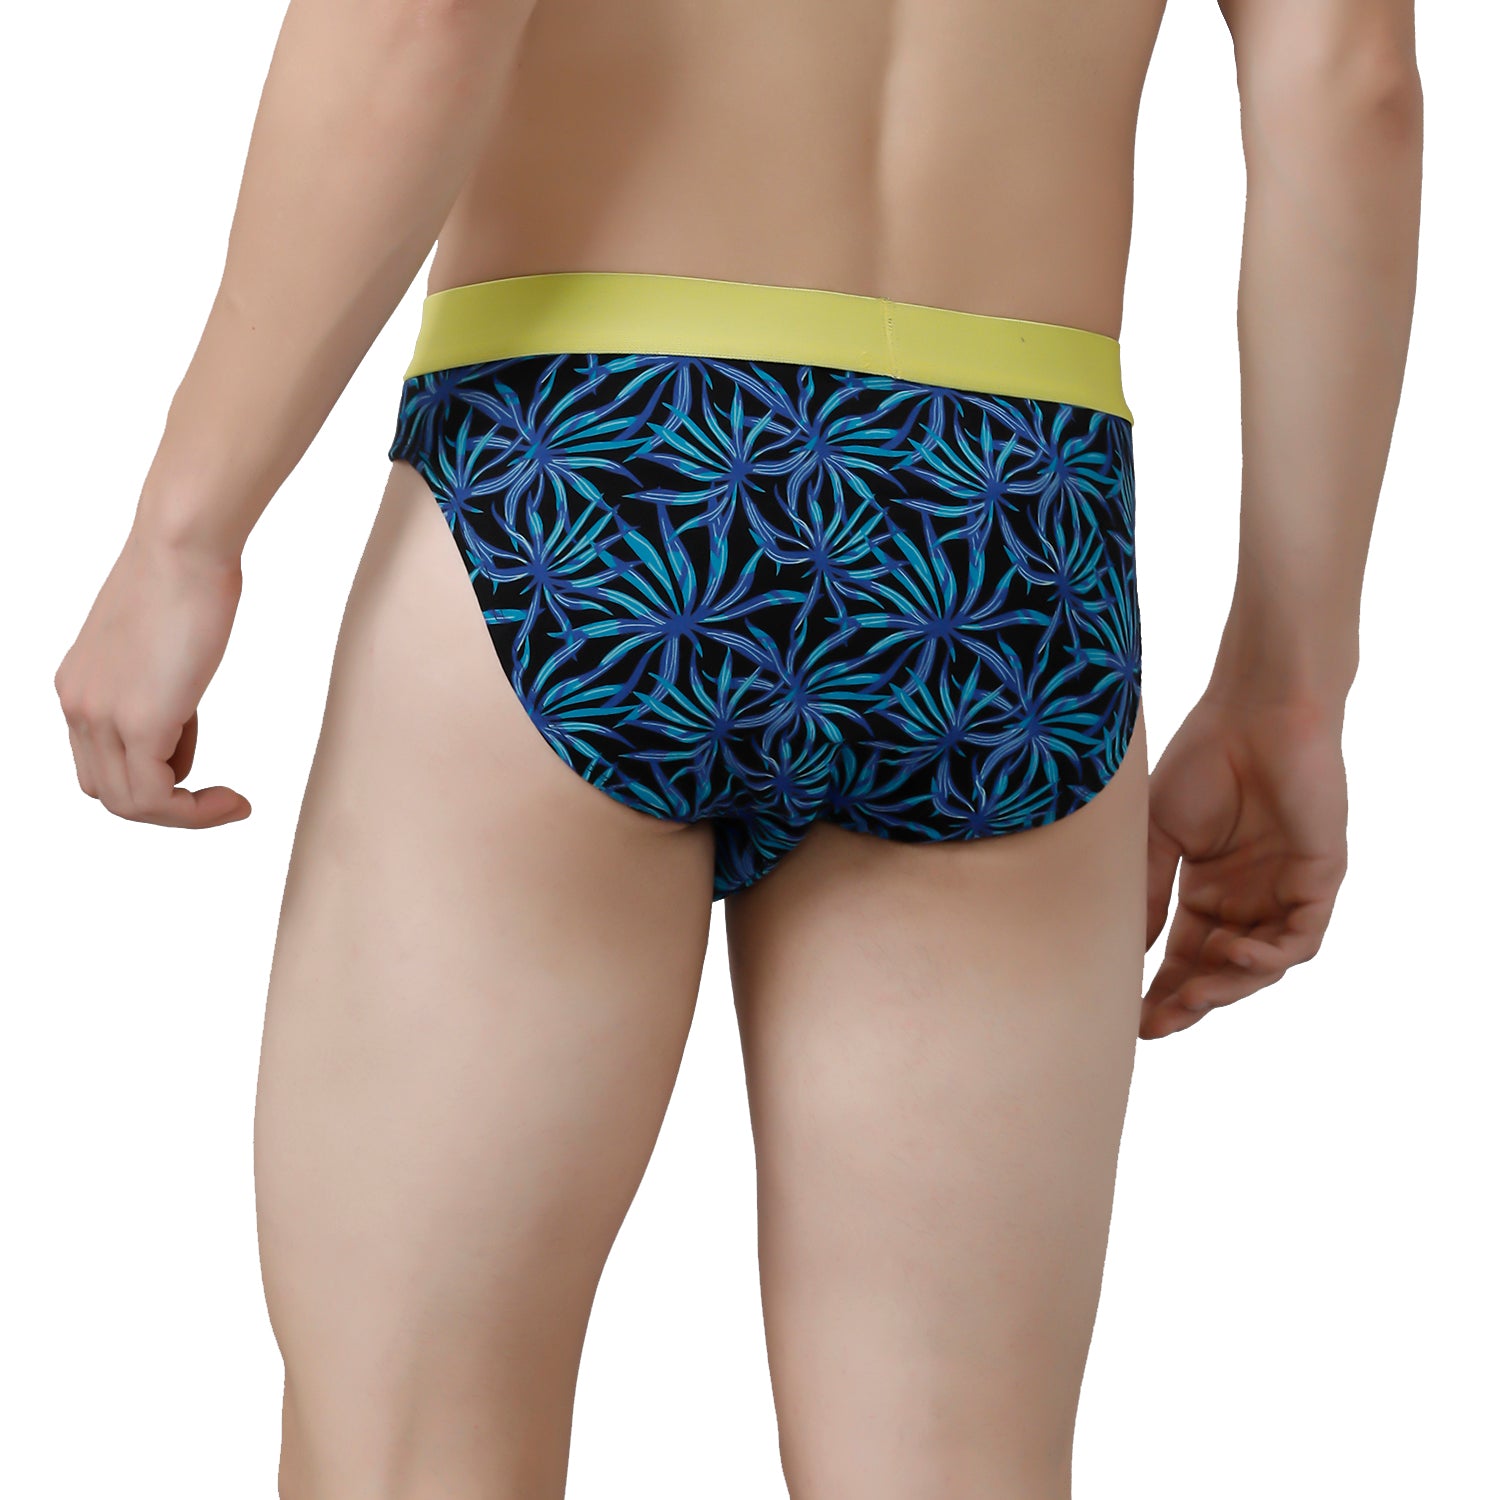 CP BRO Men's Printed Briefs with Exposed Waistband Value Pack - Blue & Blue Leaf (Pack of 2)